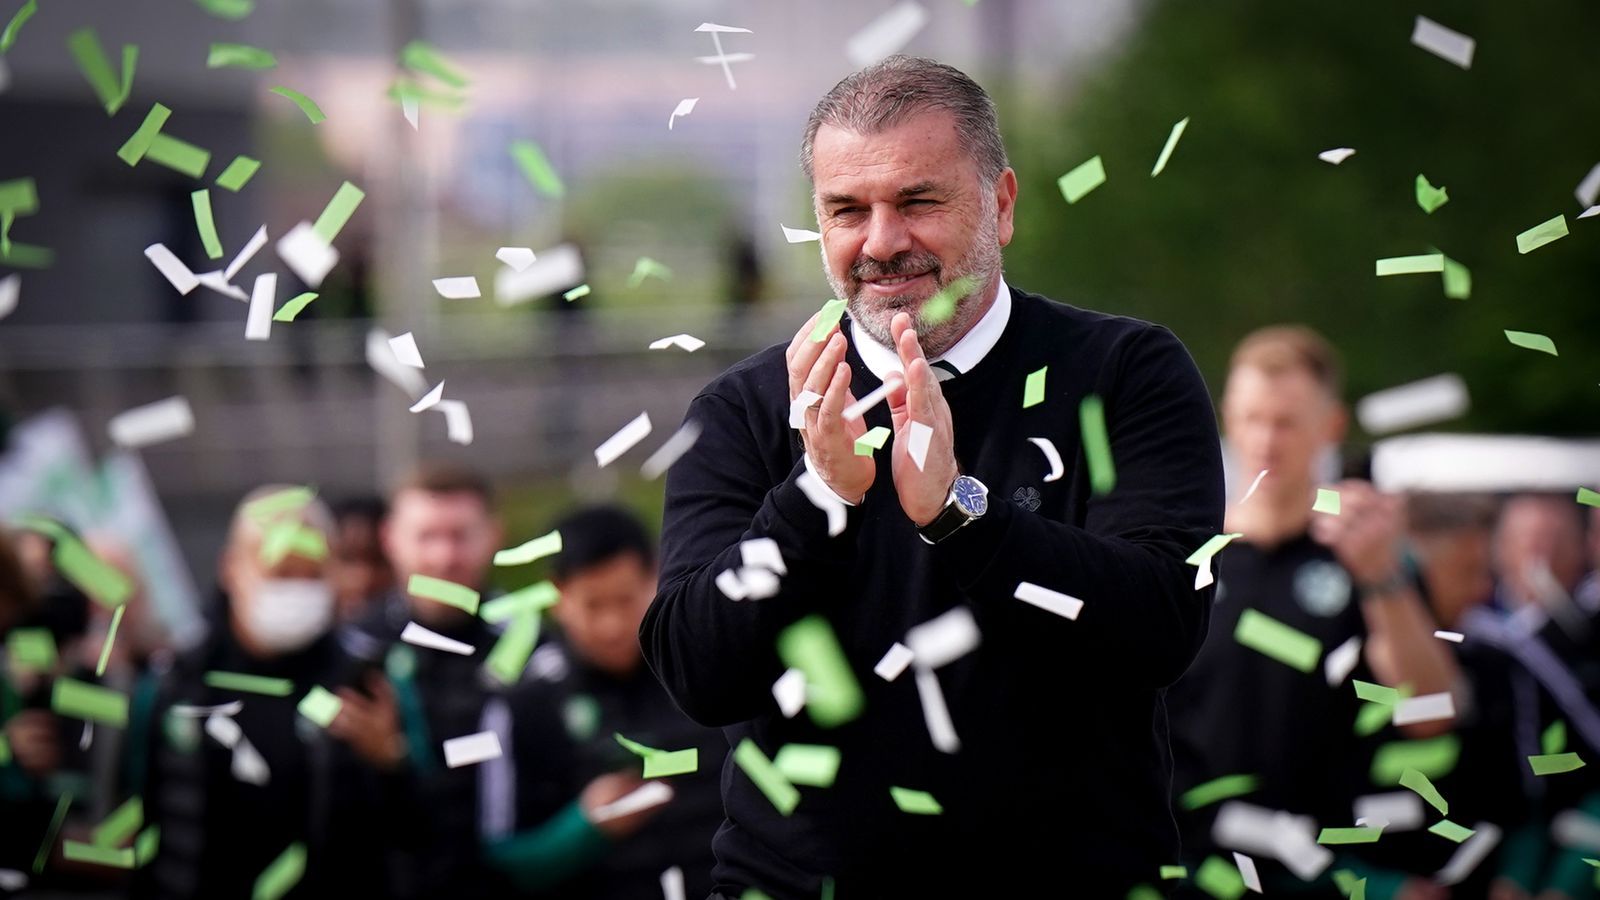 Ange Postecoglou: Celtic manager reflects on ‘positive’ year with nine-point lead at Christmas